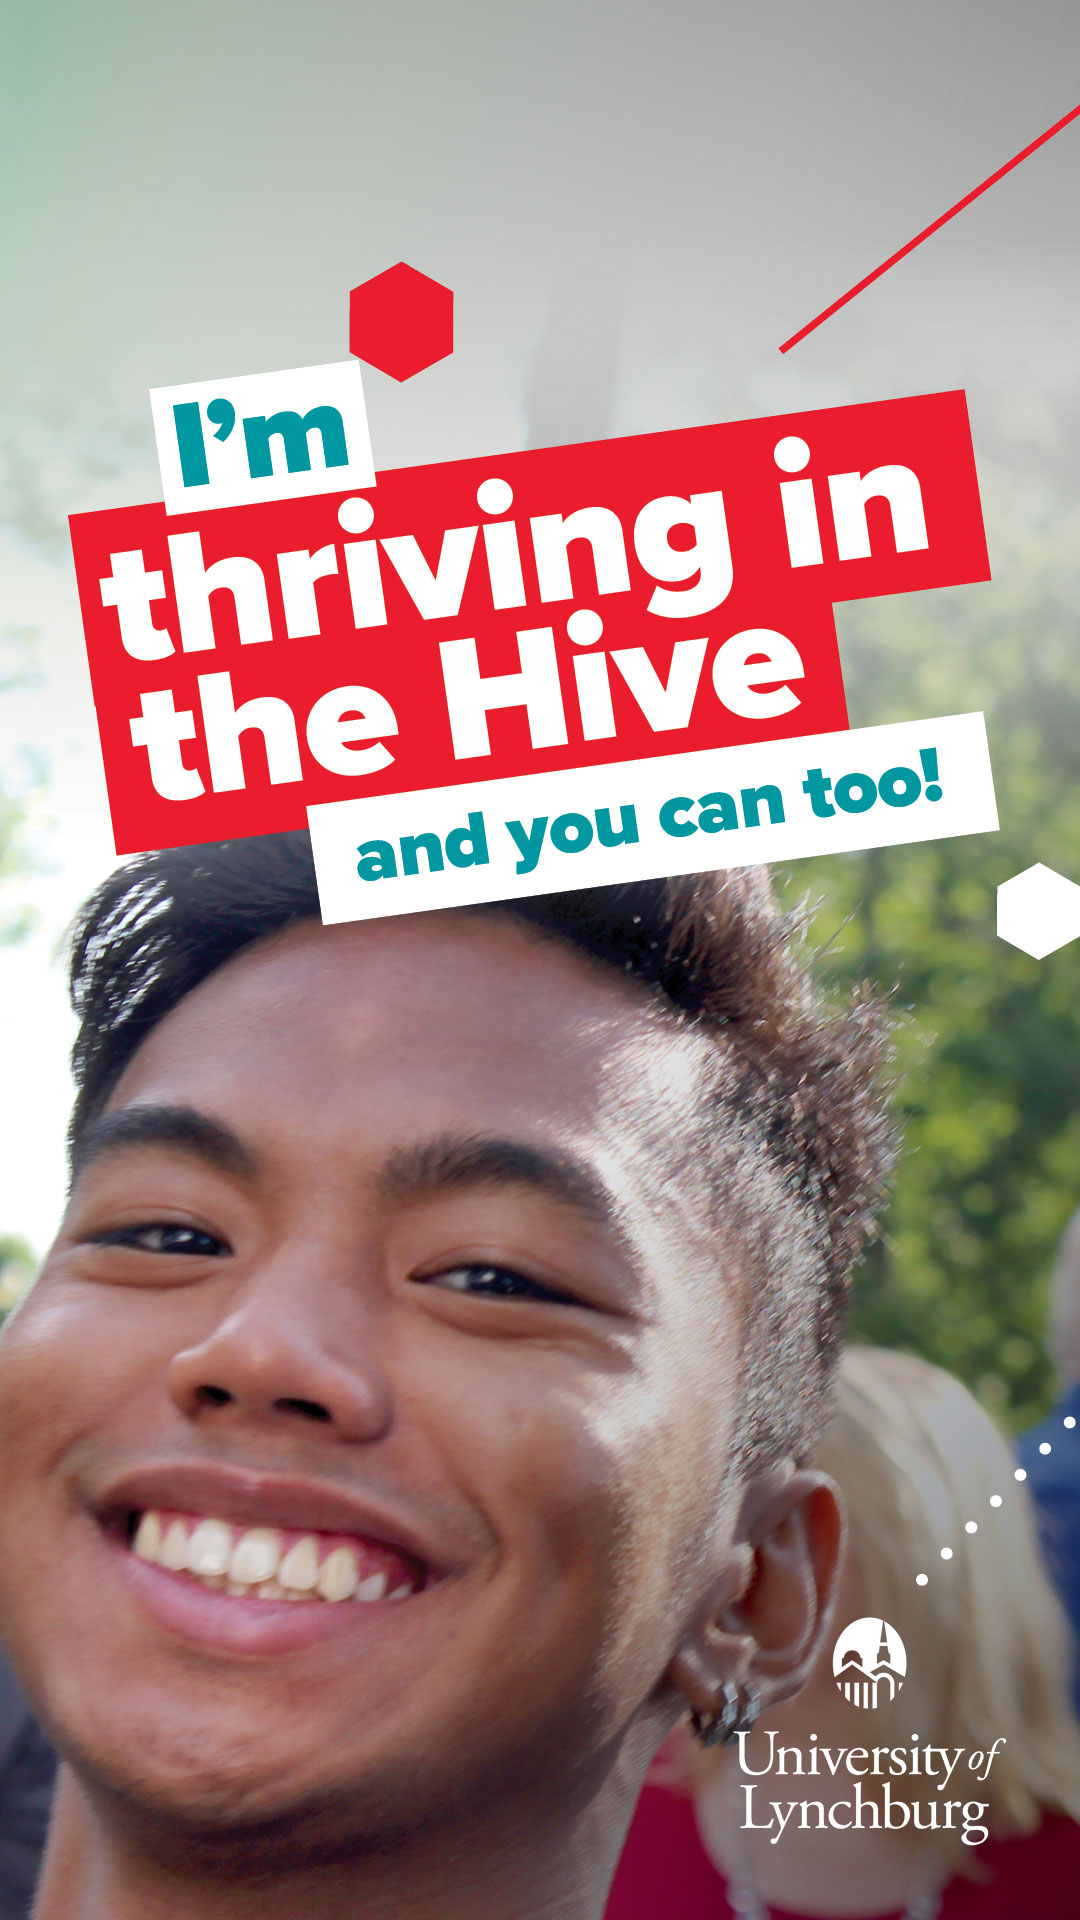 A photo of a happy student with the following text: I'm thriving in the Hive and you can too! University of Lynchburg